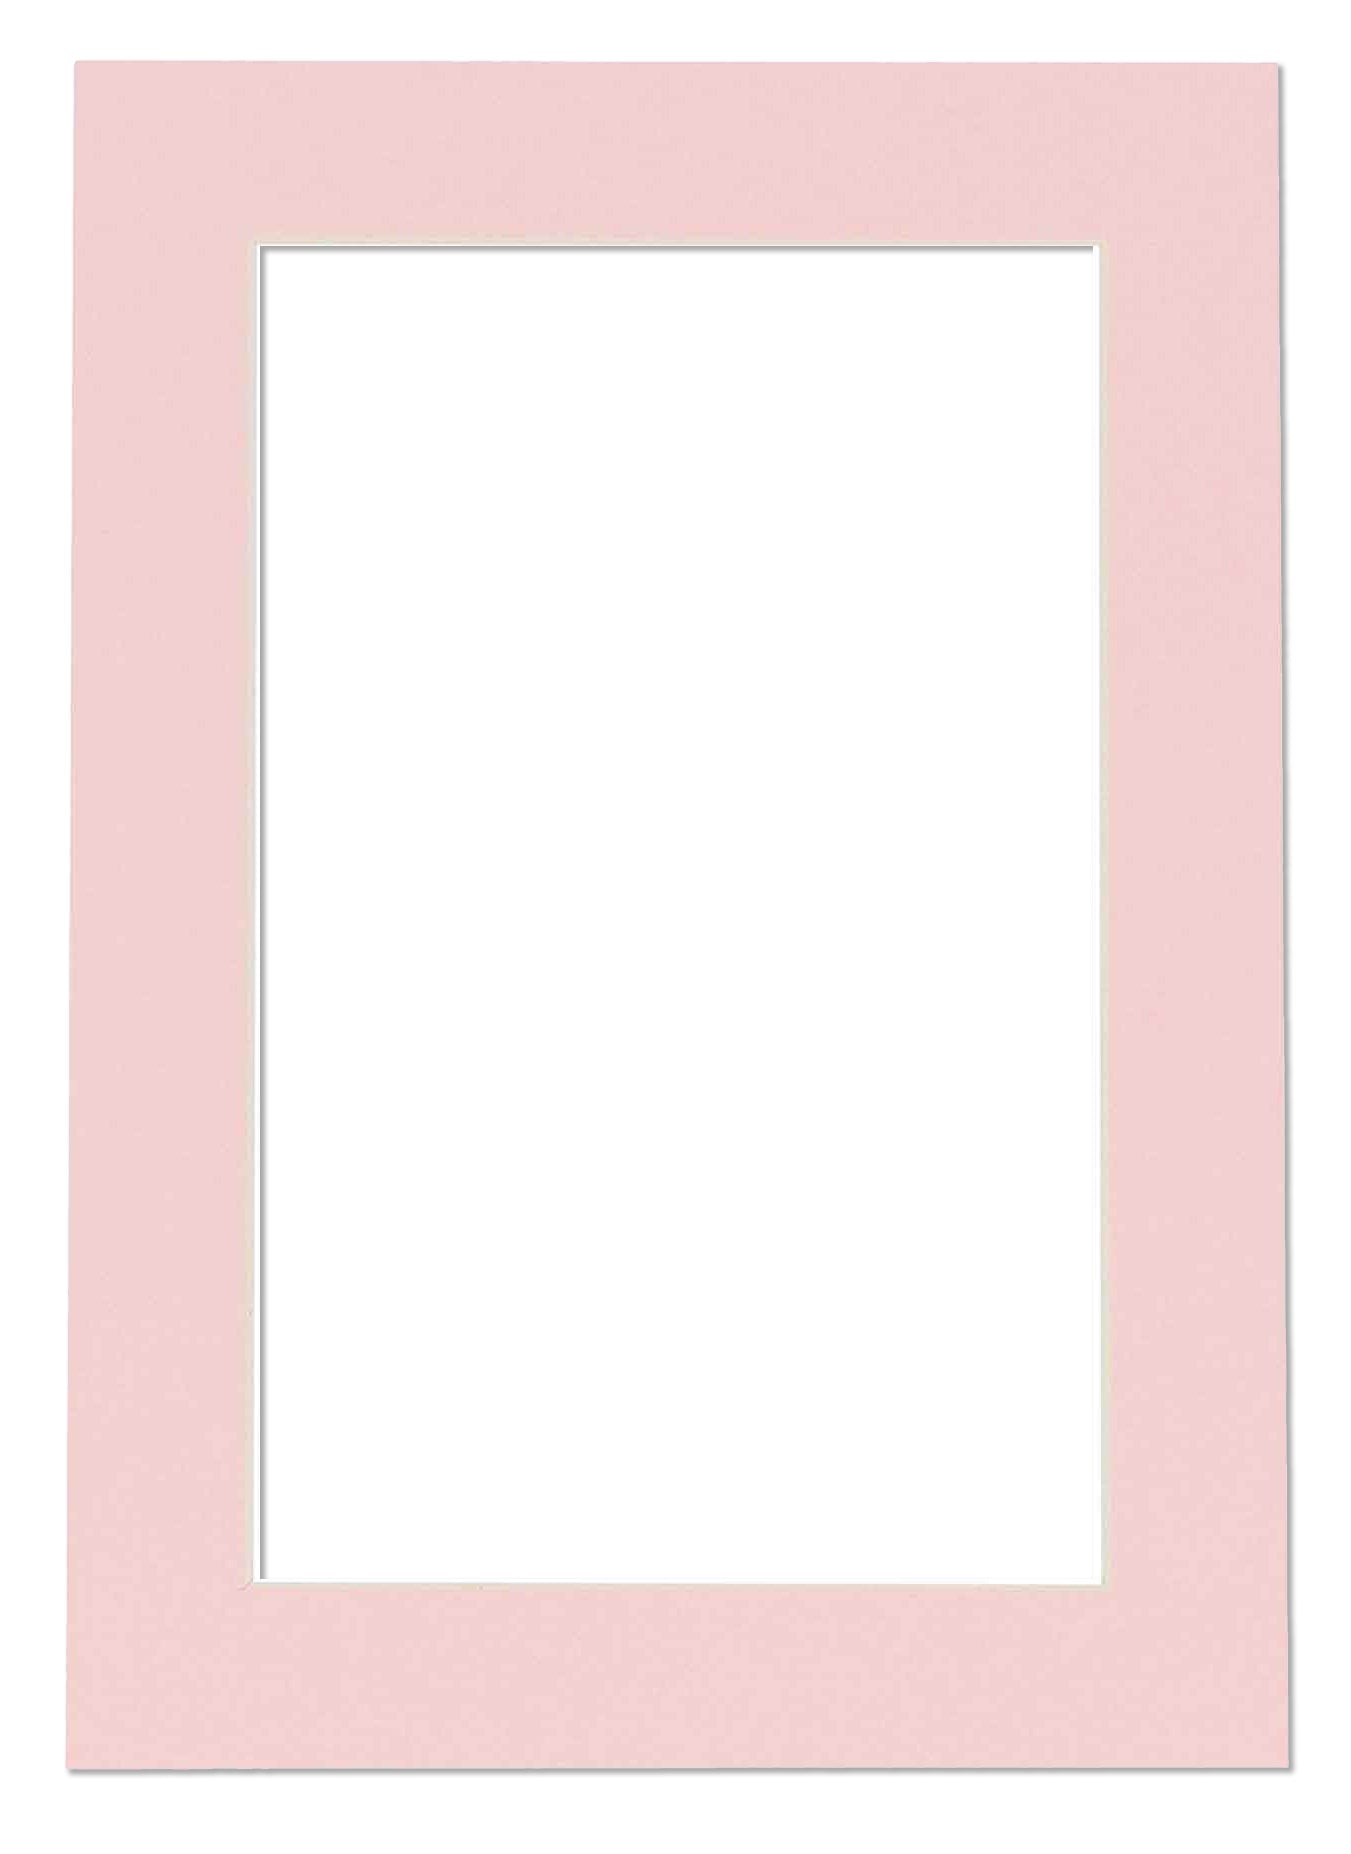  8x10 Mat for 16x20 Frame - Precut Mat Board Acid-Free White  8x10 Photo Matte Made to Fit a 16x20 Picture Frame, Premium Matboard for  Family Photos, Show Kits, Art, Picture Framing, Pack of 10 Mats